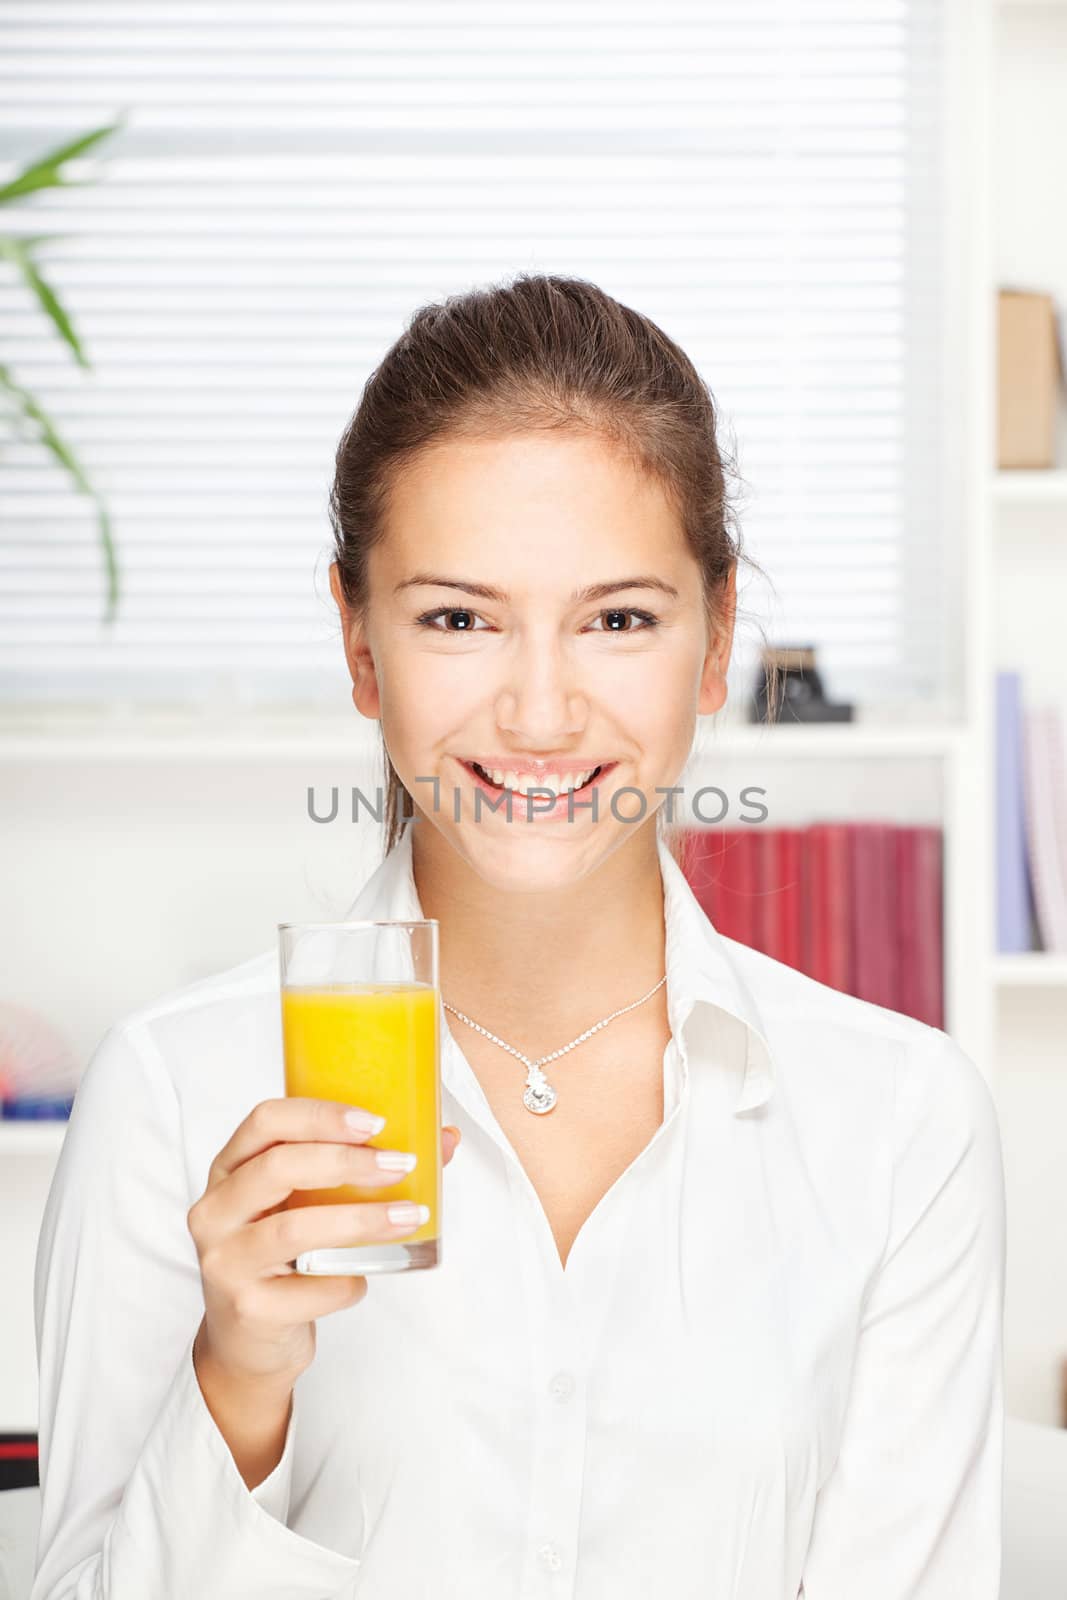 Young smiling woman holding glass of orange juice by imarin